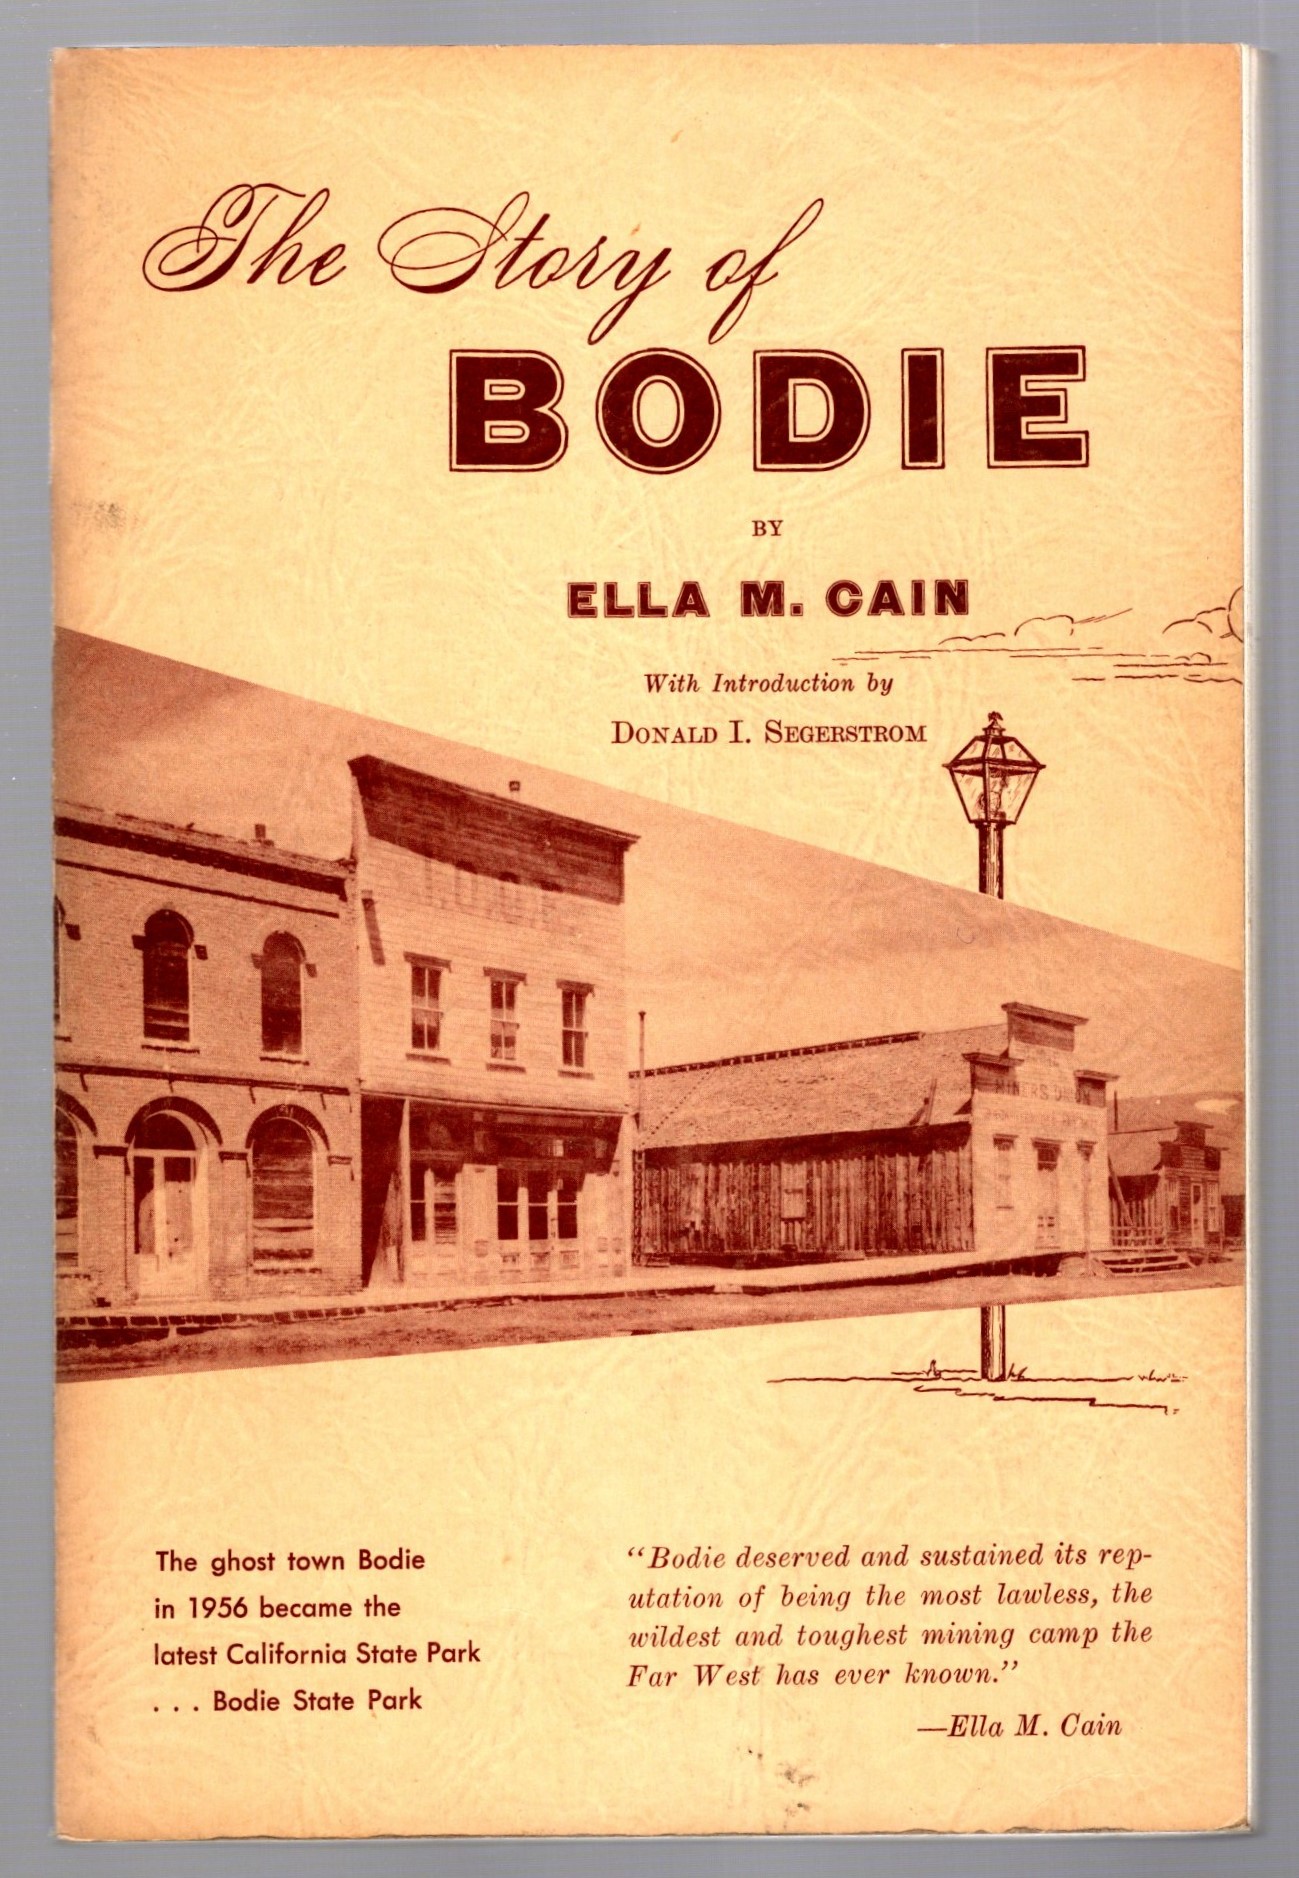 Image for Story of Bodie, the :  The Most Lawless, the Wildest and Toughest Mining Camp in California